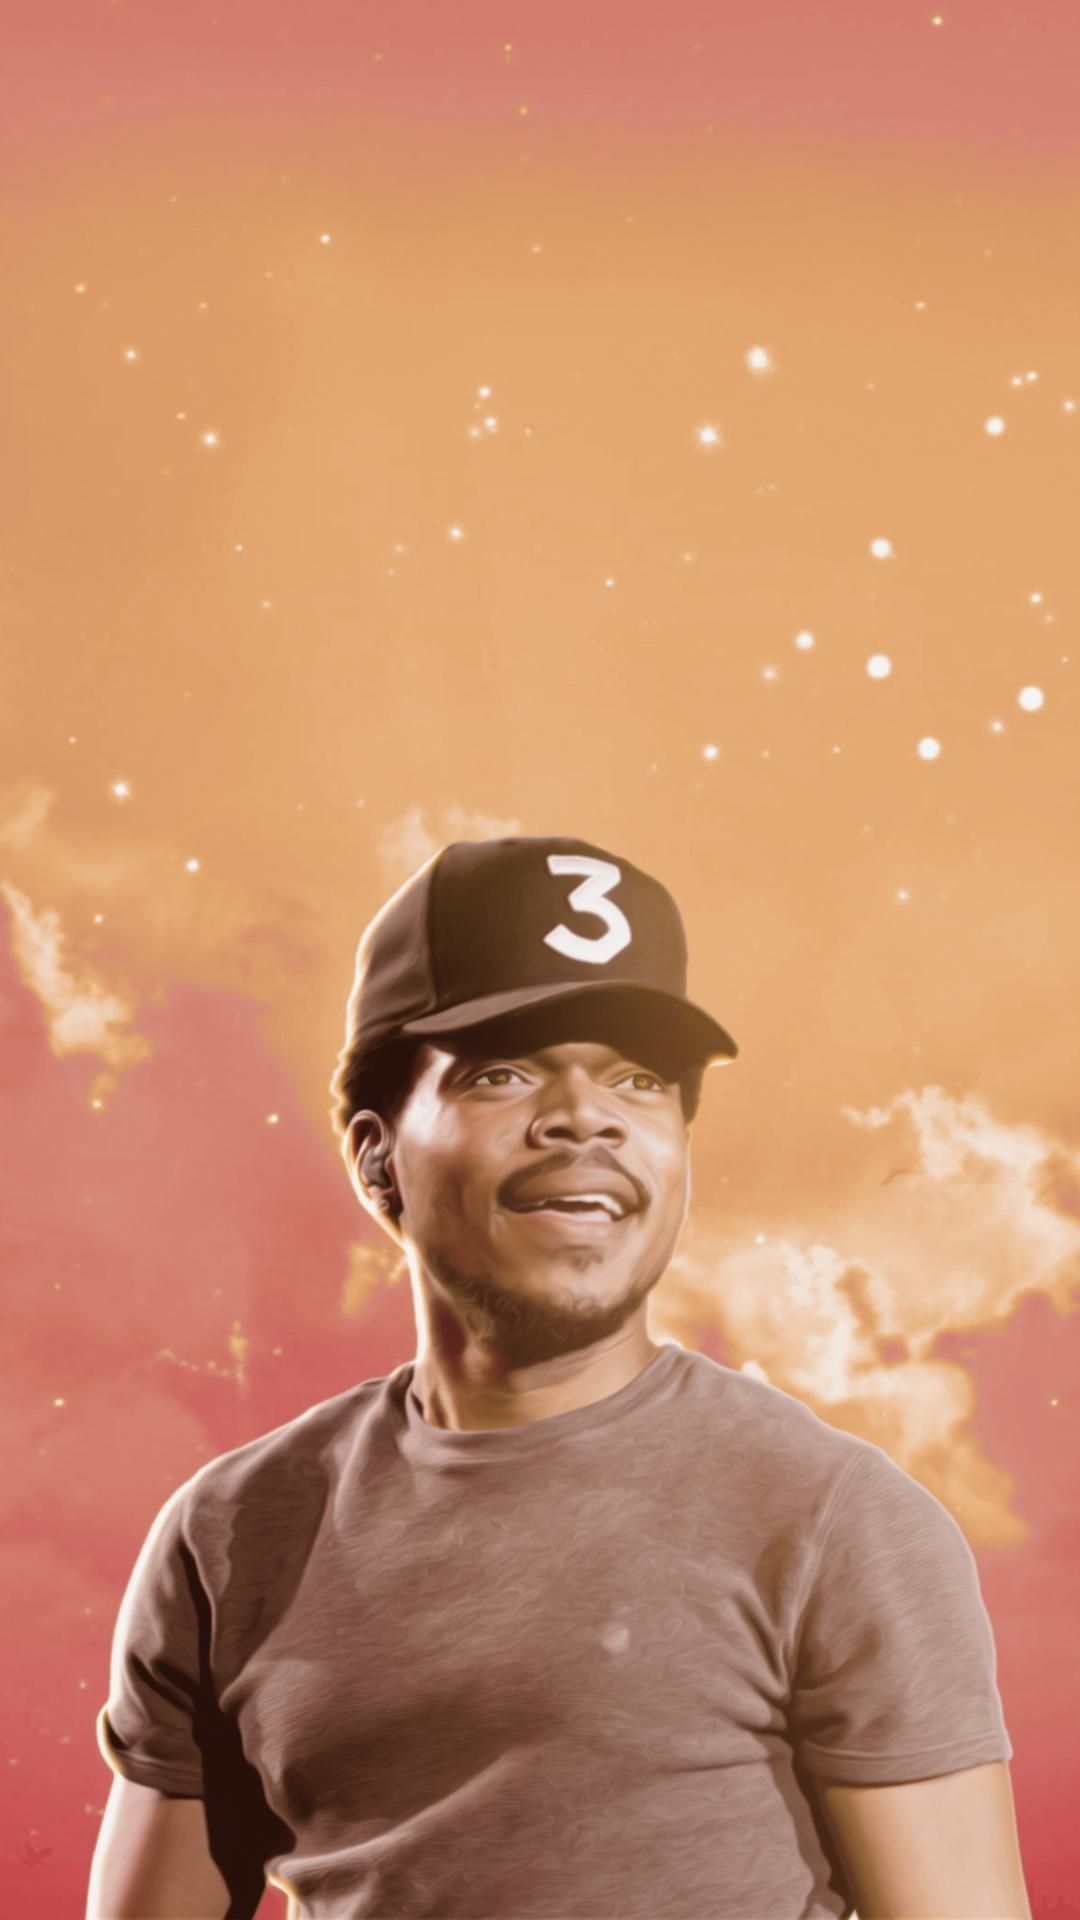 Chance the Rapper wallpaper for iPhone and Android - Chance the Rapper